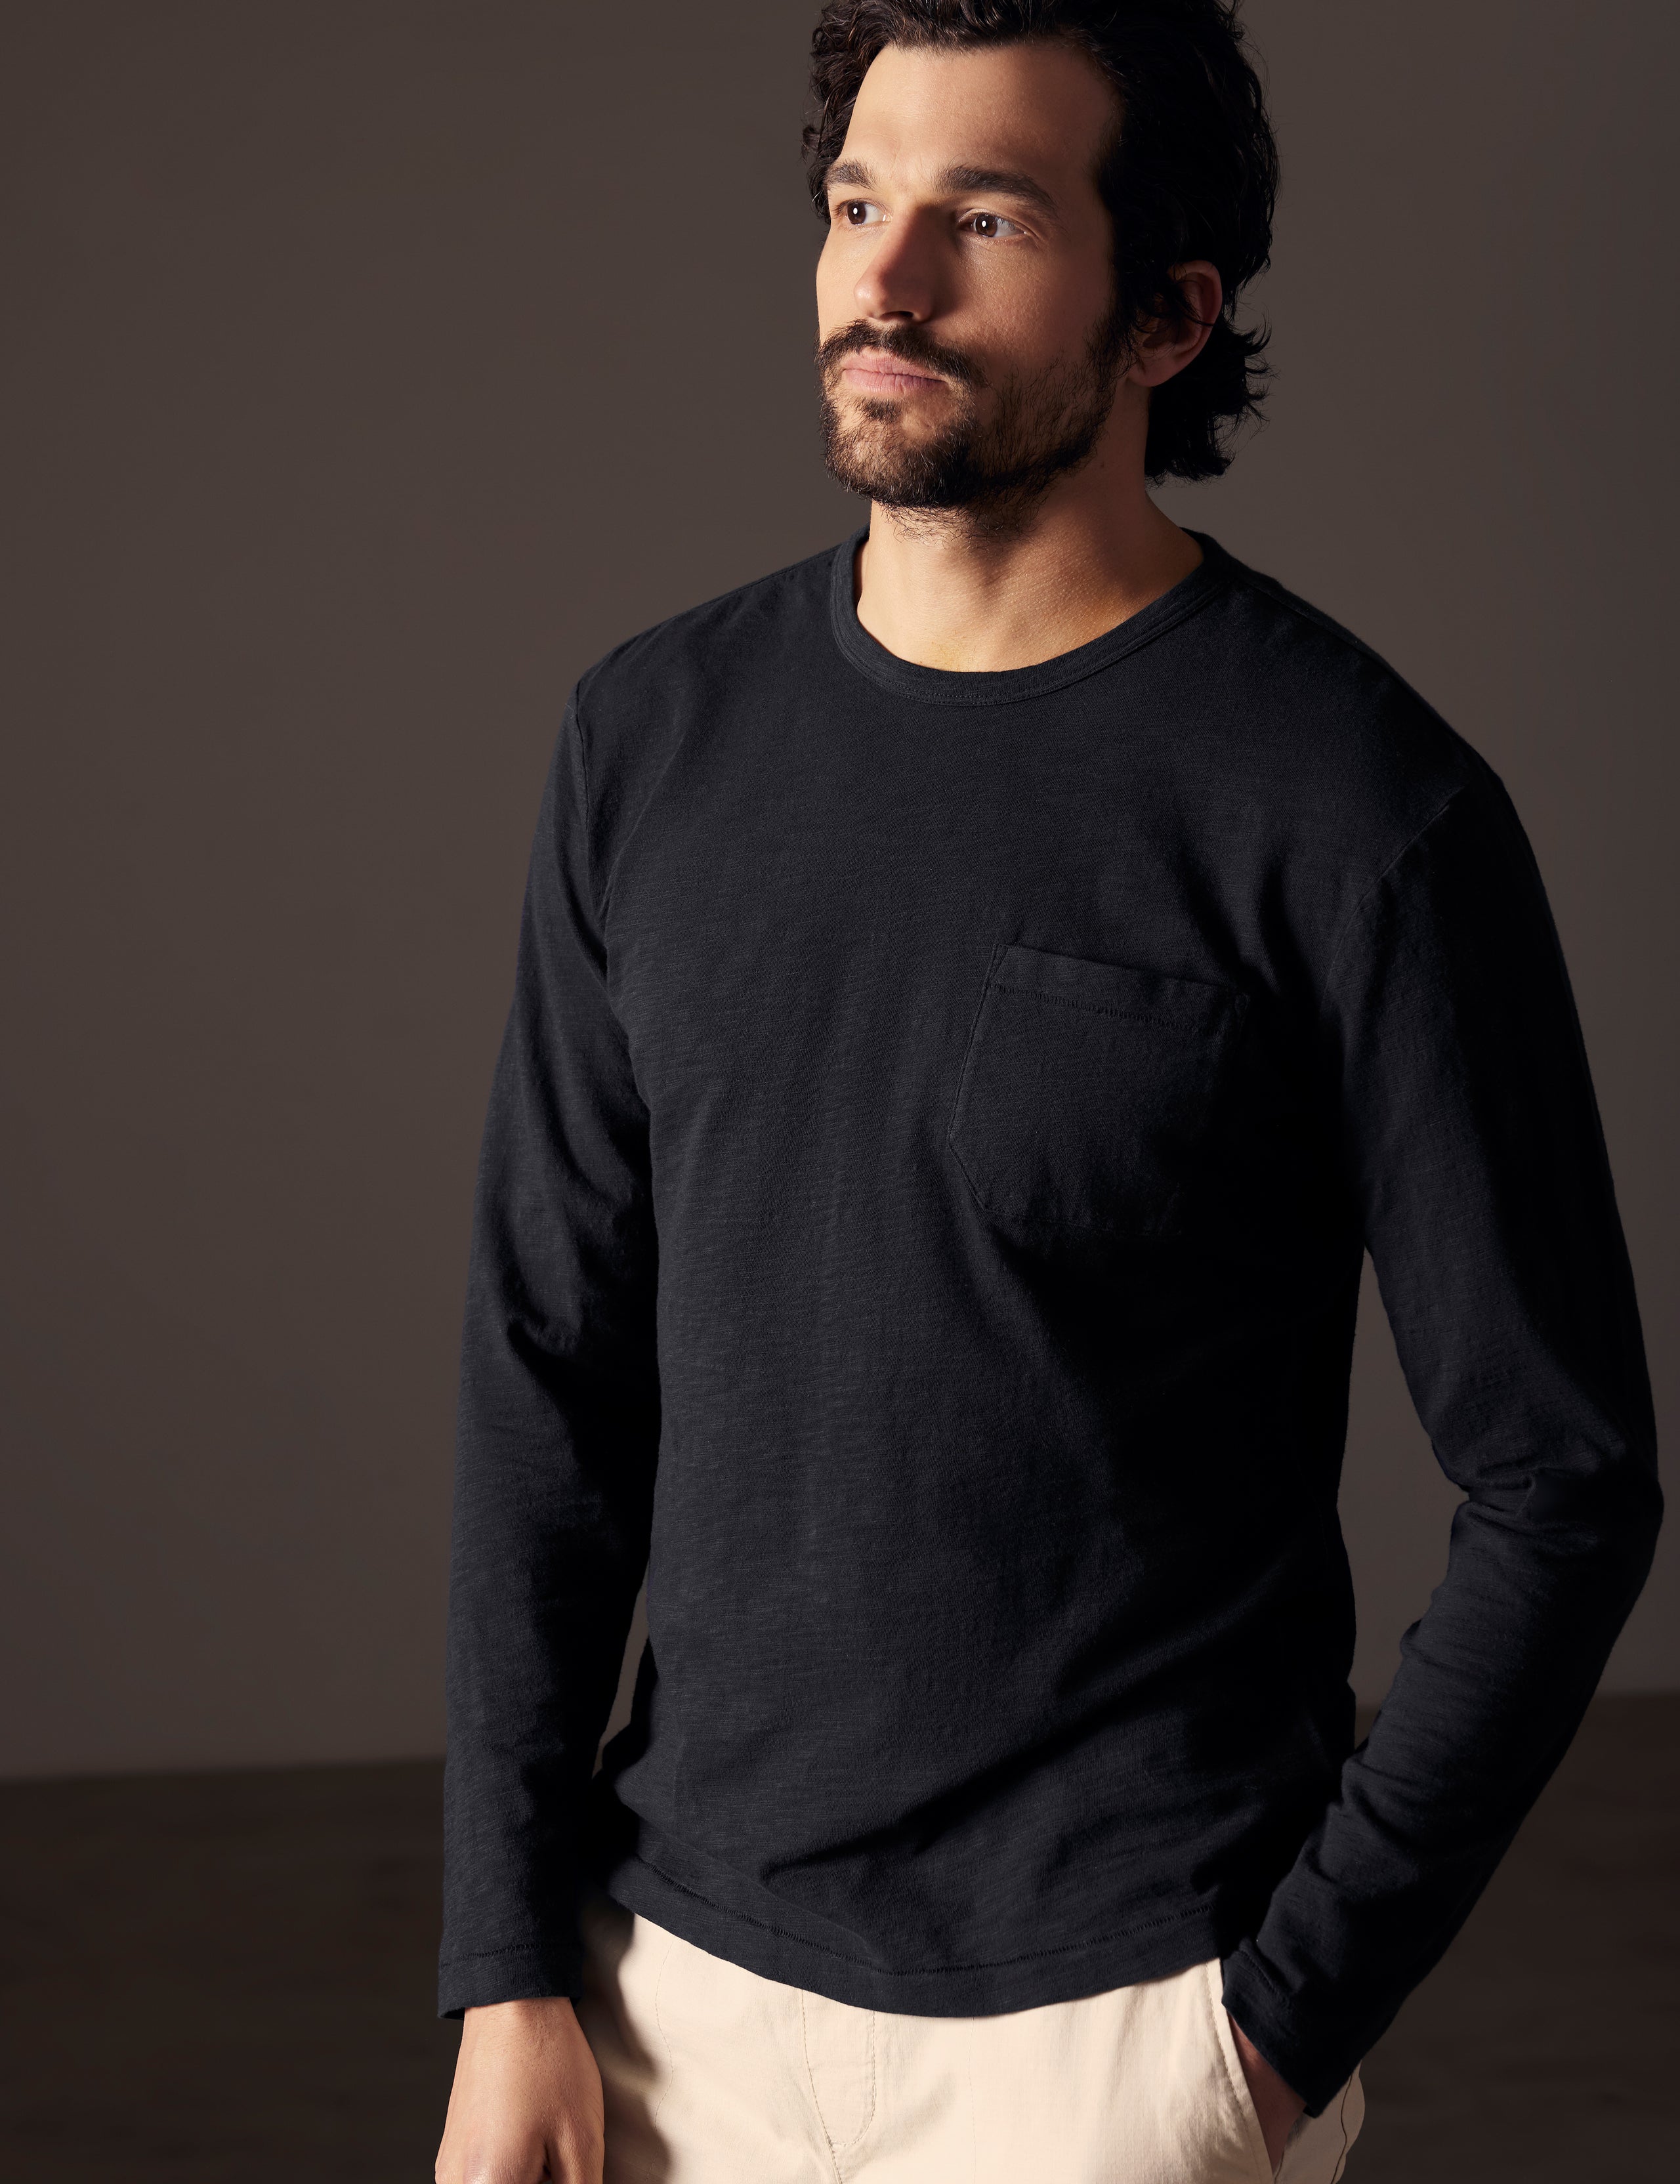 man wearing black long-sleeve tee from AETHER Apparel